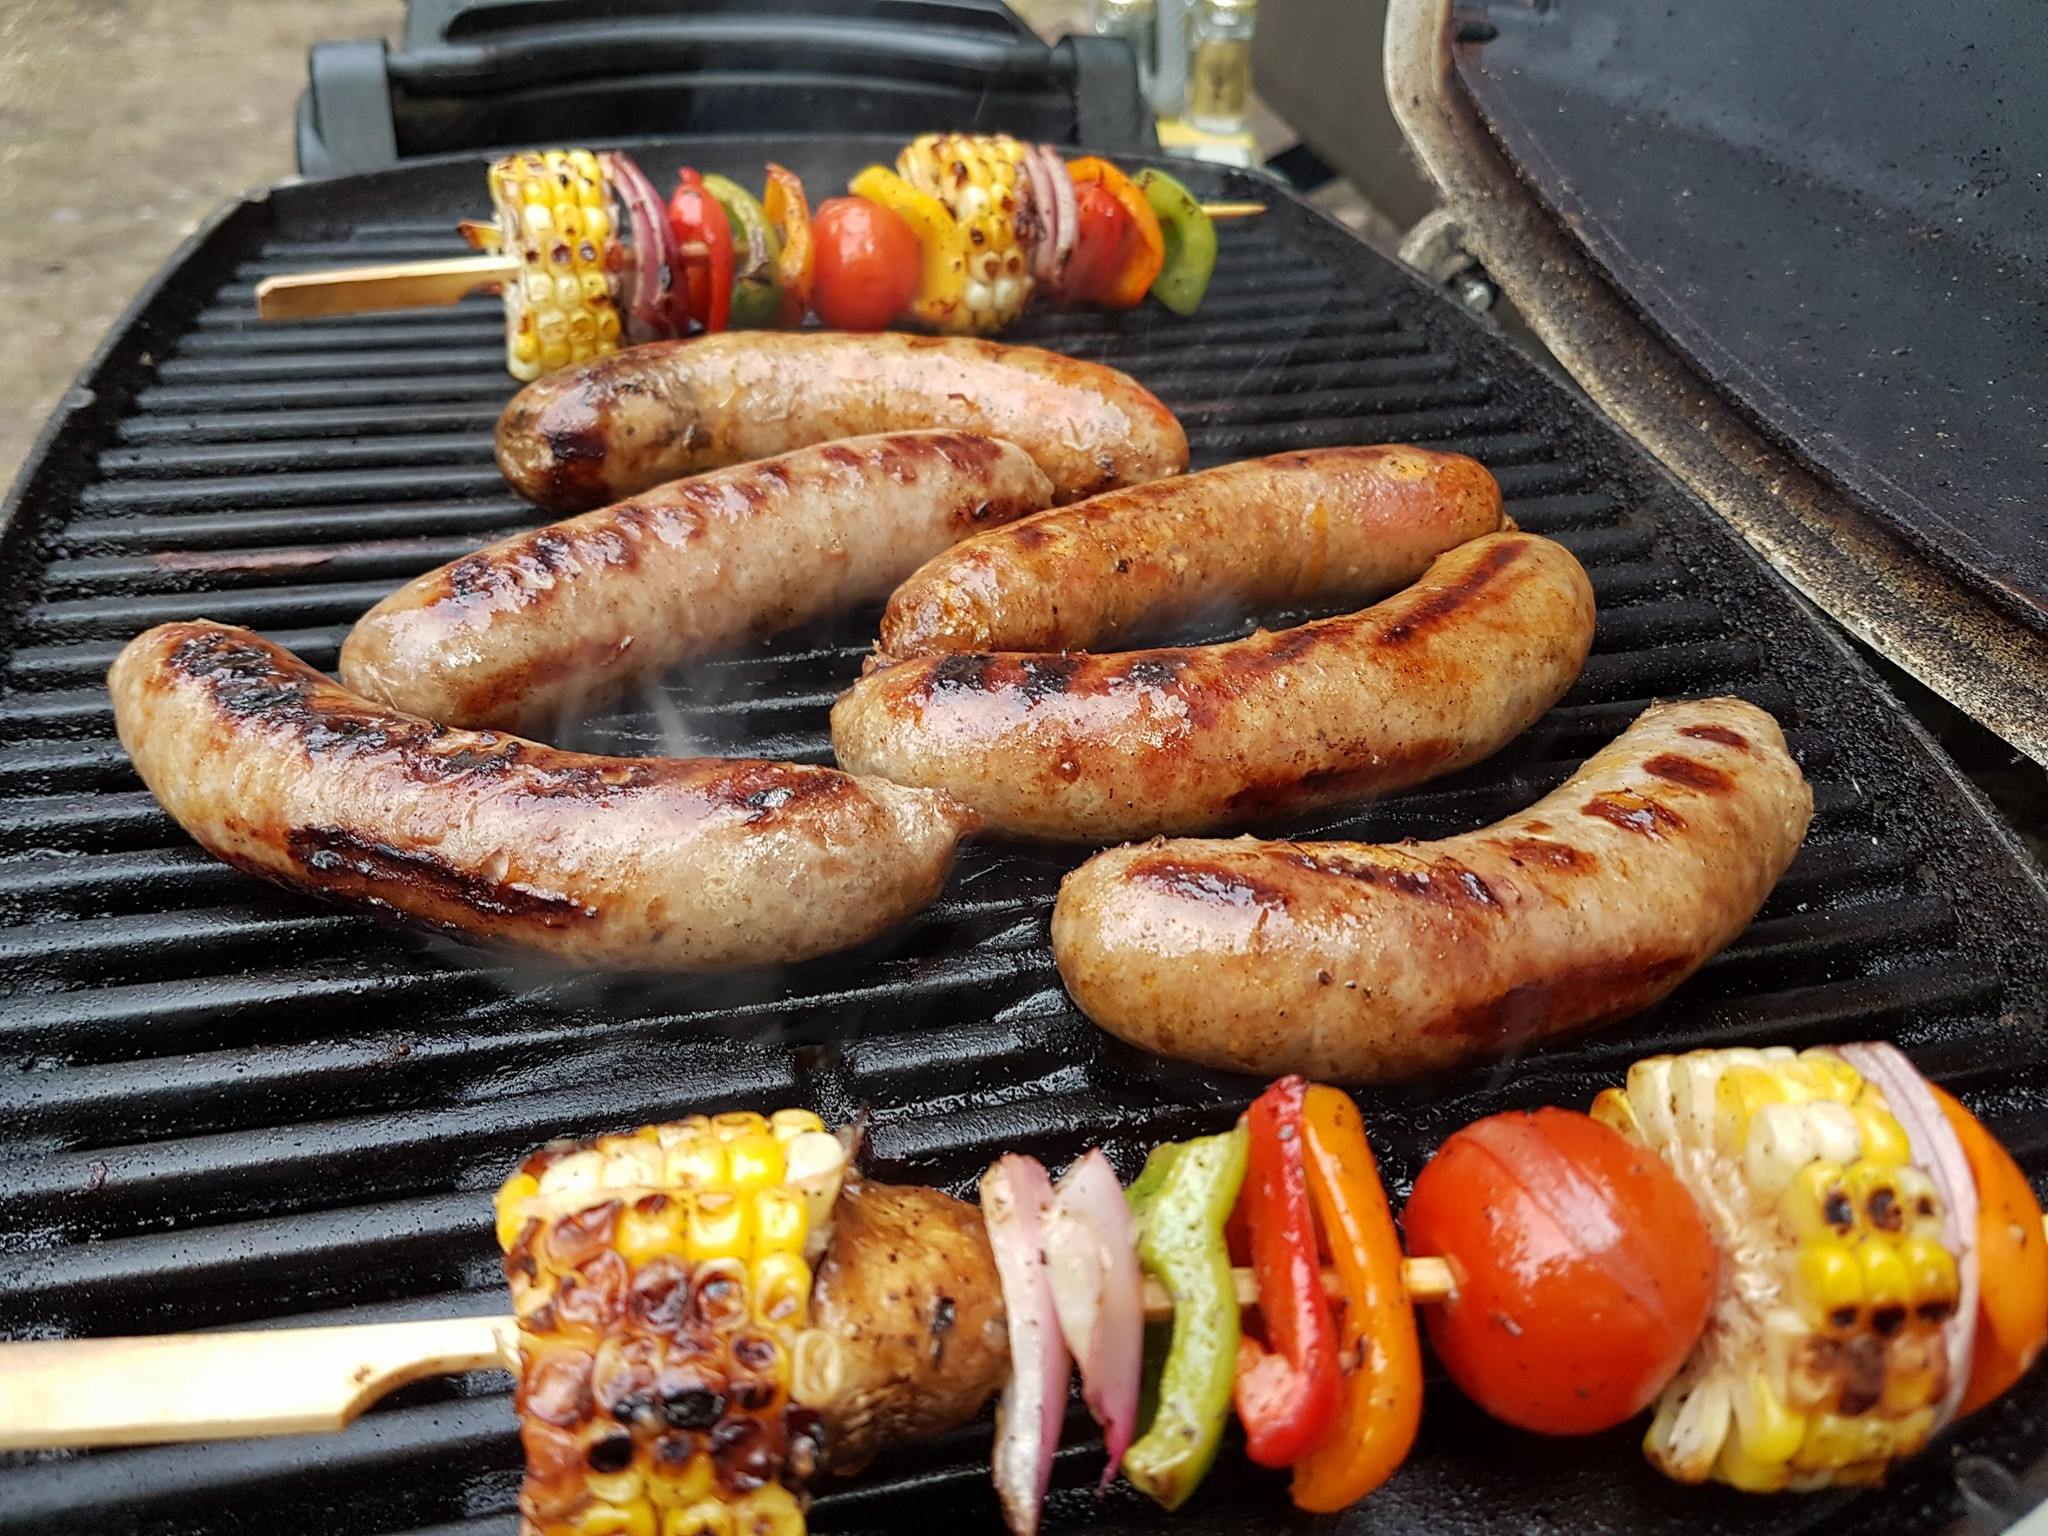 Photo of some sausages and vegetable skewers being cooked on a portable grill